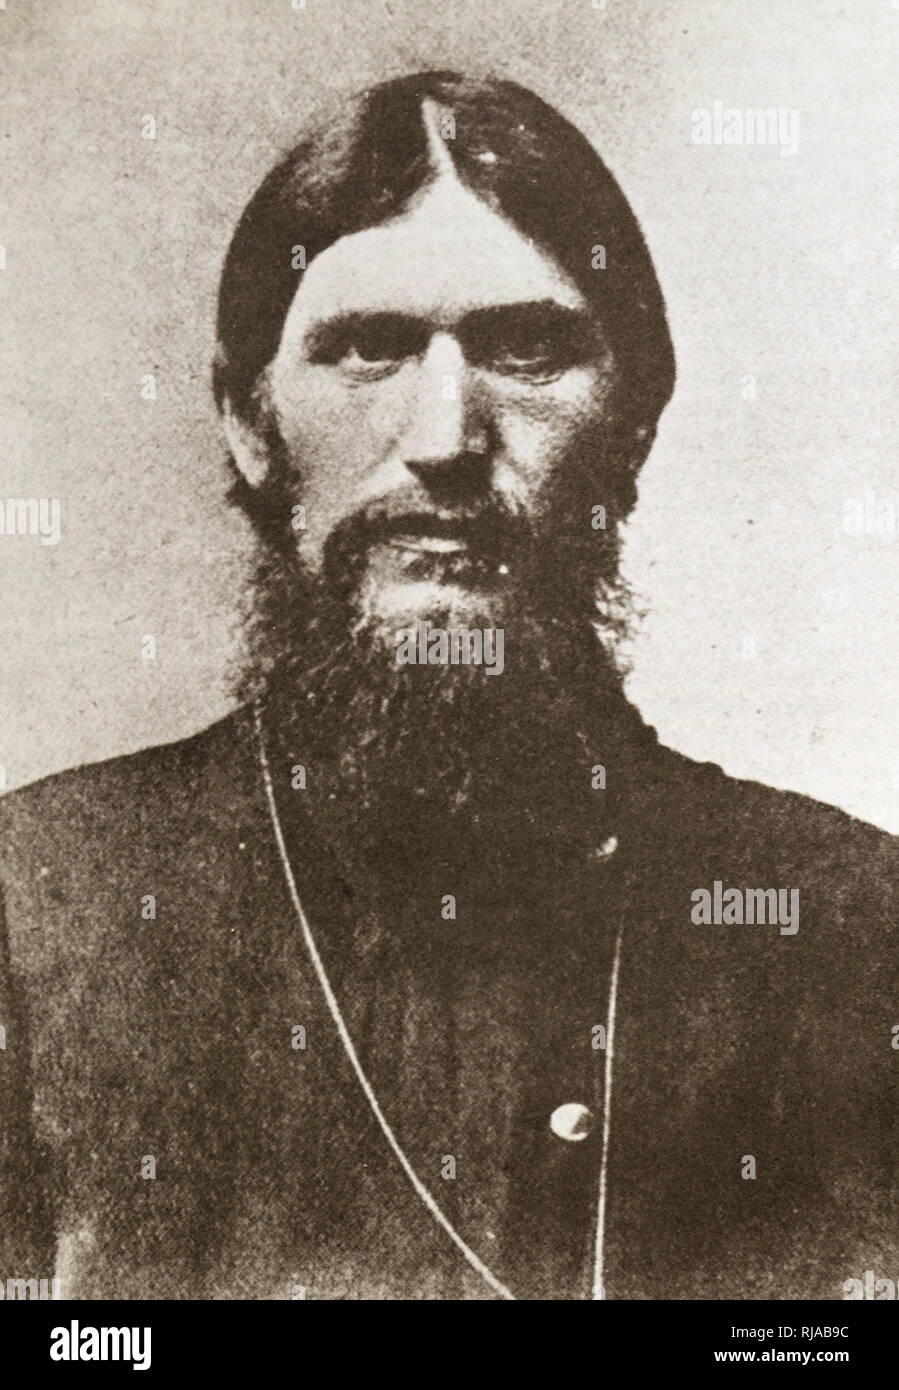 Grigori Yefimovich Rasputin (1869 – 1916); Russian mystic and self-proclaimed holy man who befriended the family of Tsar Nicholas II and gained considerable influence in late imperial Russia. Stock Photo